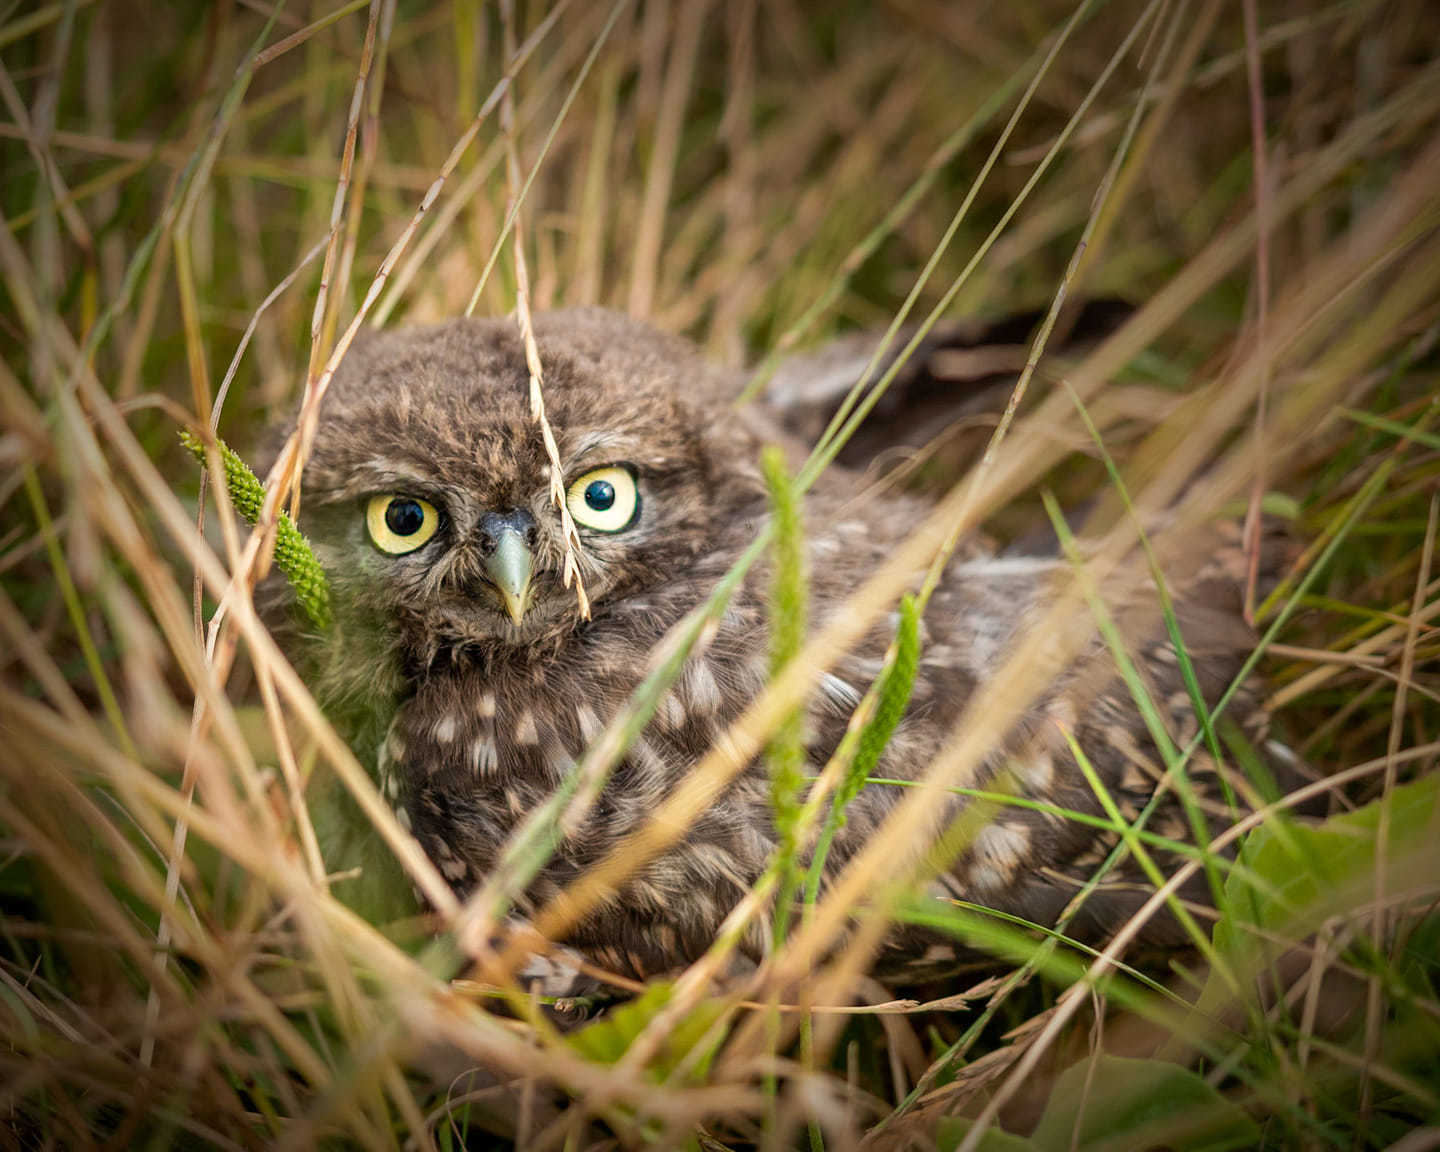 Third place: Little owl on the Laverstock Downs By Emma Siddons